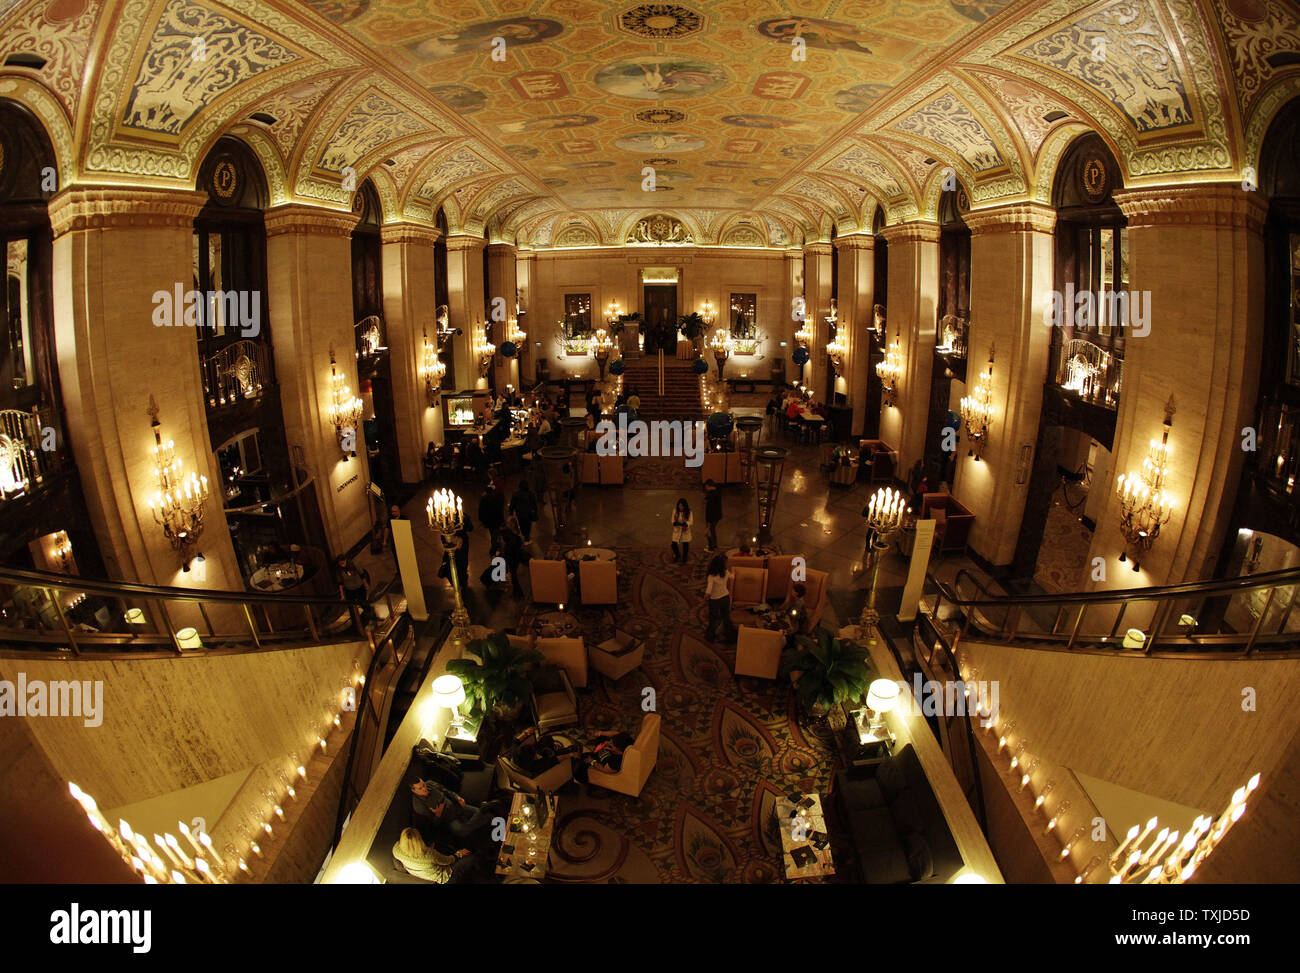 The lobby of the Palmer House Hilton hotel turns on its lights after observing Earth Hour in Chicago on March 27, 2010. An estimated one billion people in 121 countries are expected to take part in Earth Hour, a time set aside on Saturday to turn off unnecessary lights for one hour to raise awareness about energy conservation.     UPI/Brian Kersey Stock Photo